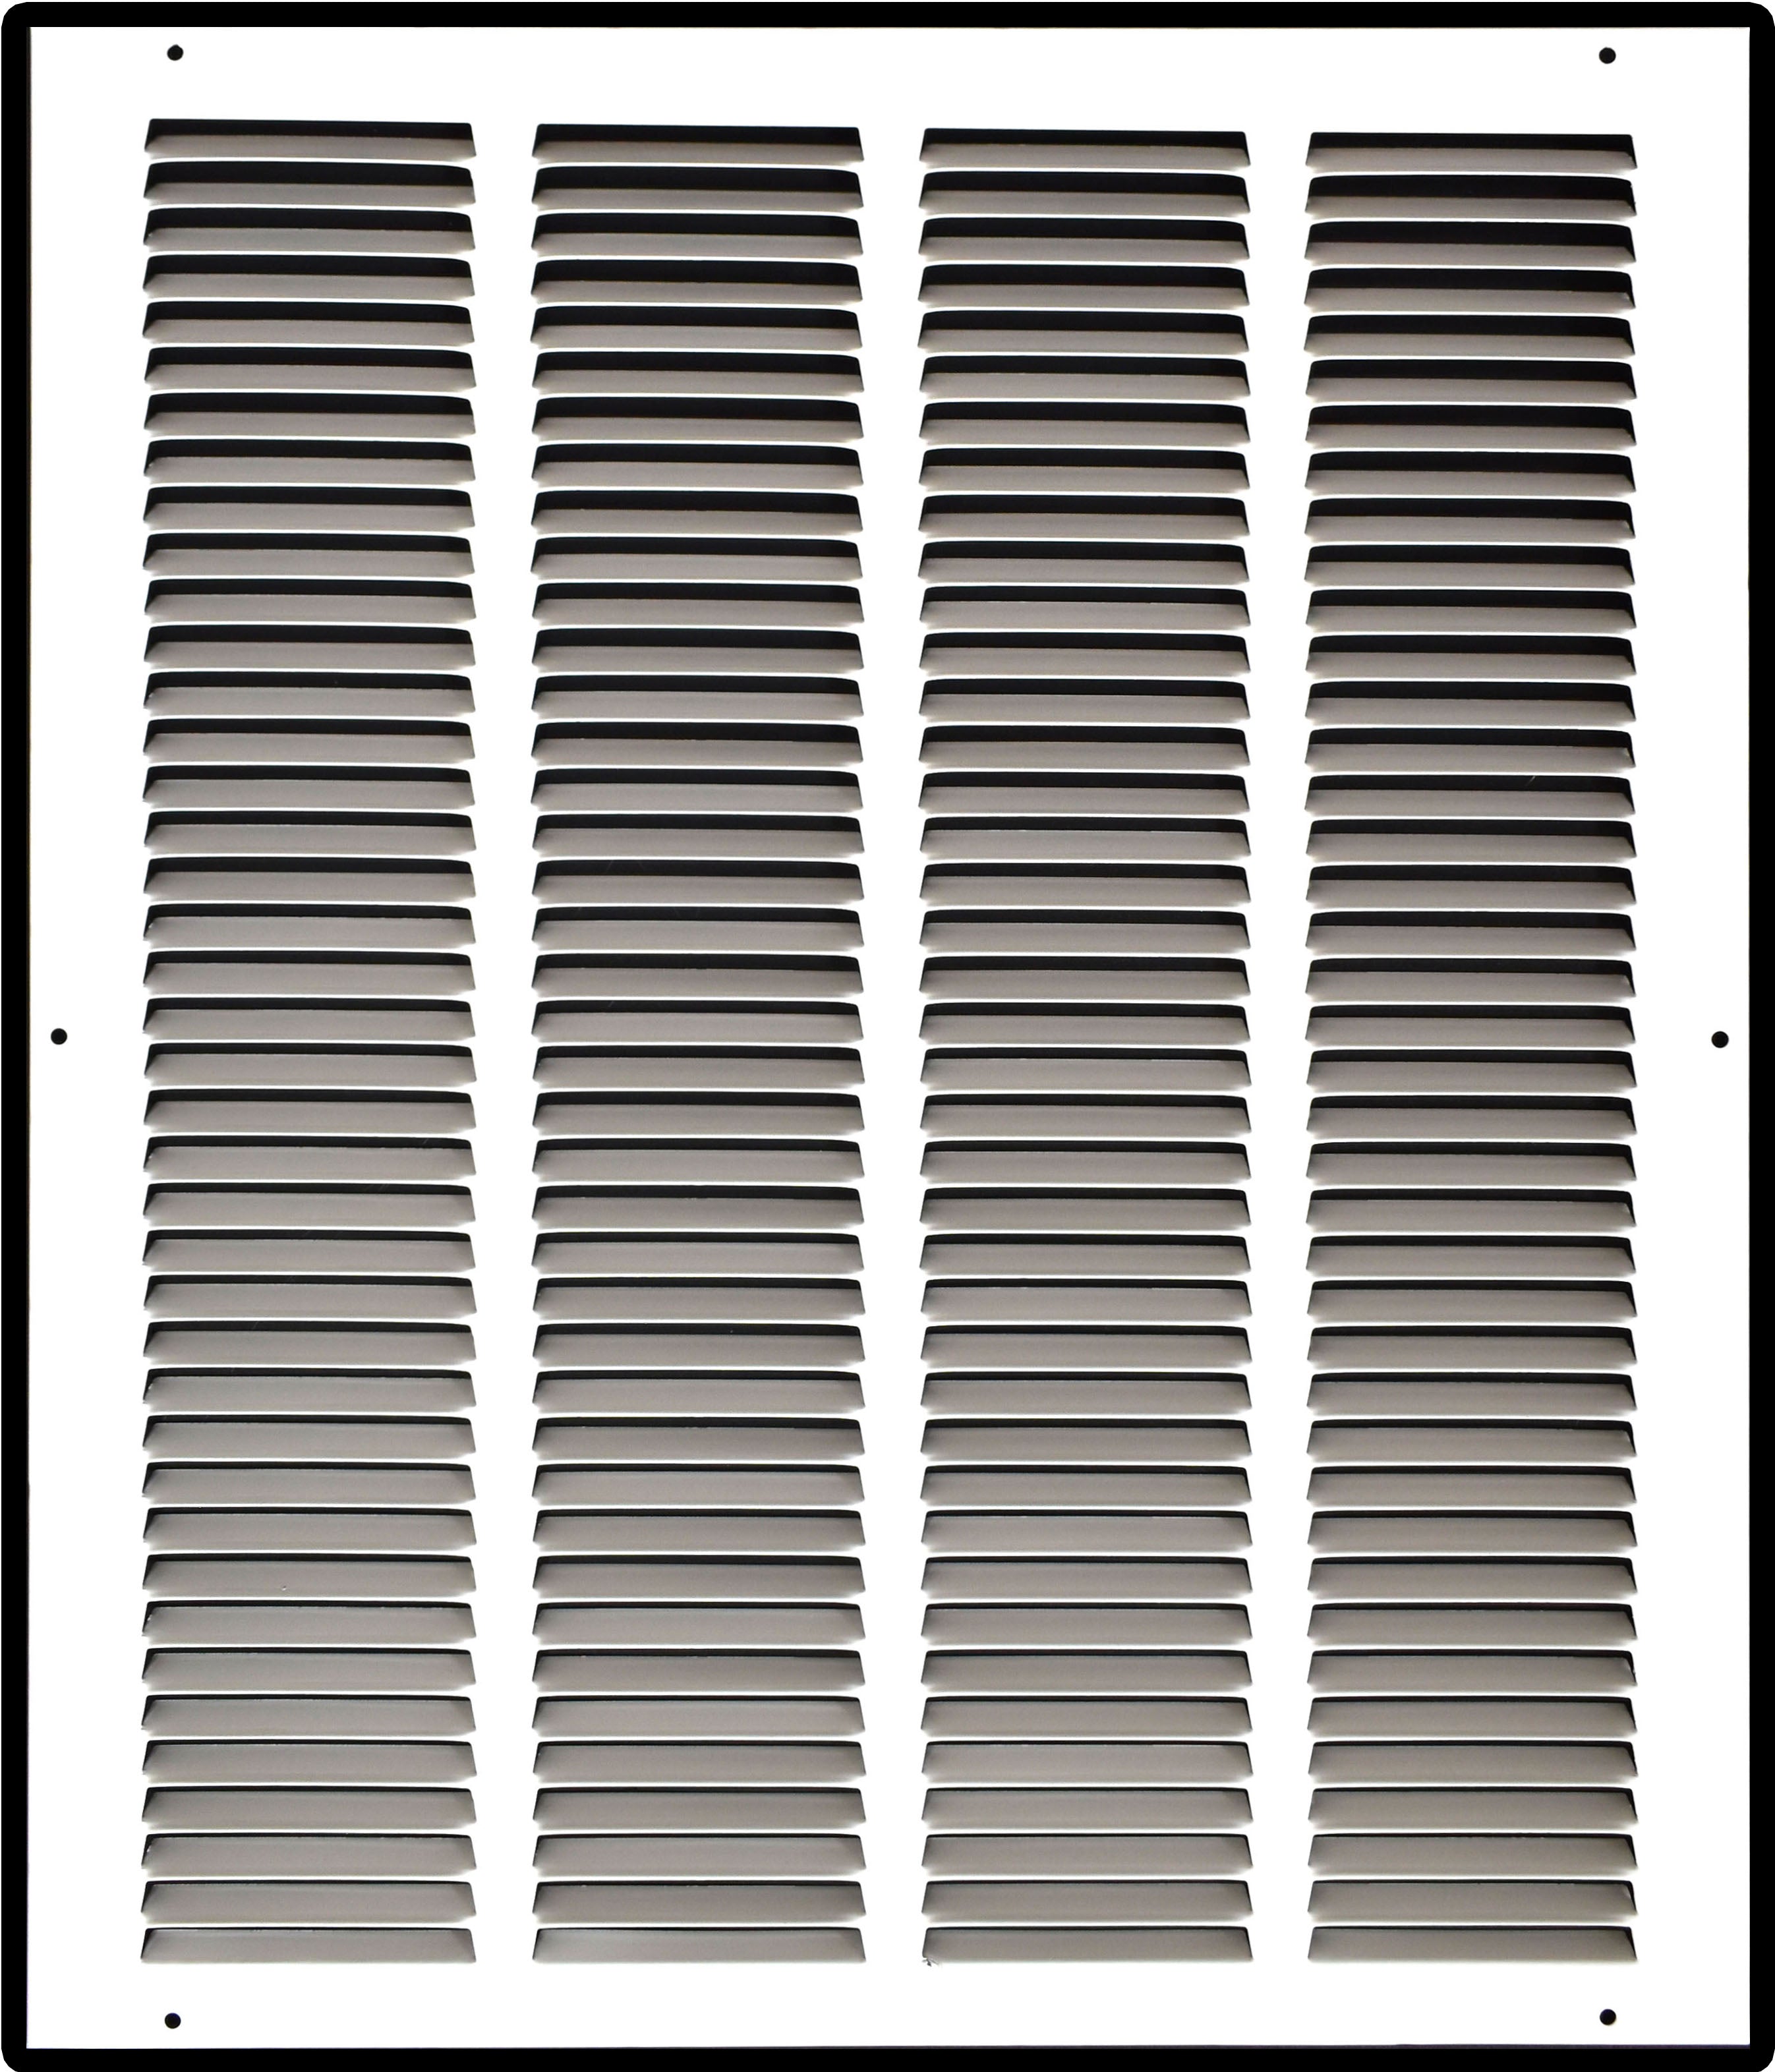 airgrilles 16" x 20" duct opening   hd steel return air grille for sidewall and ceiling 7hnd-flt-rg-wh-16x20 038775640718 - 1